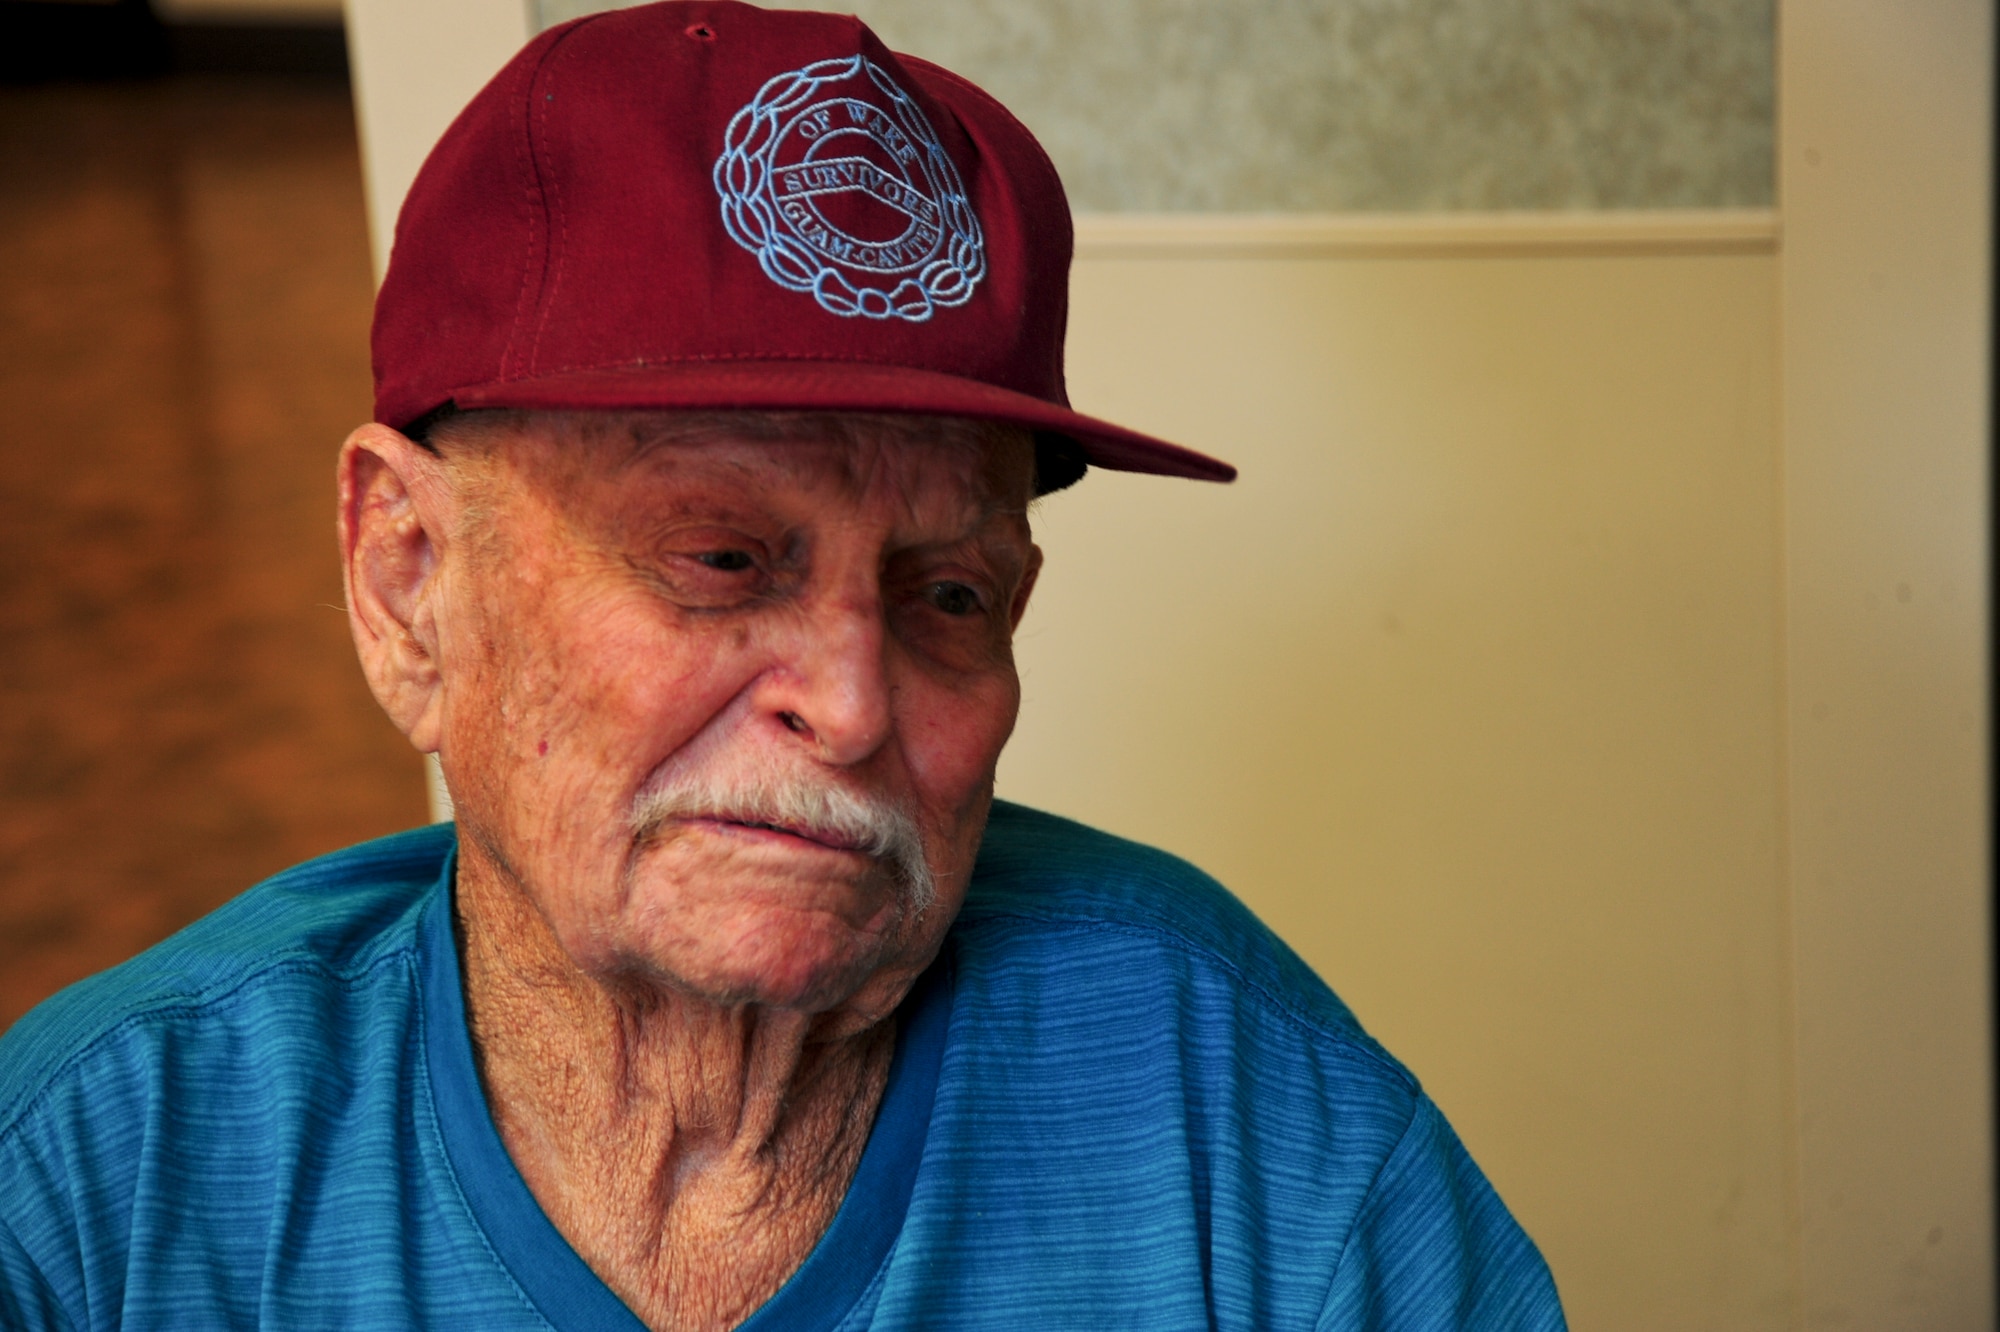 Malcolm Johnson, World War II veteran and former prisoner of war, tells his story at the Tucson Veterans Center in Tucson, Ariz., Aug. 18, 2015. Johnson was a civilian contractor when he was captured in December 1941. Nearly five years after being captured, Johnson was awarded the Bronze Star Medal with Valor in 1947. (U.S. Air Force photo by Senior Airman Chris Massey/Released)